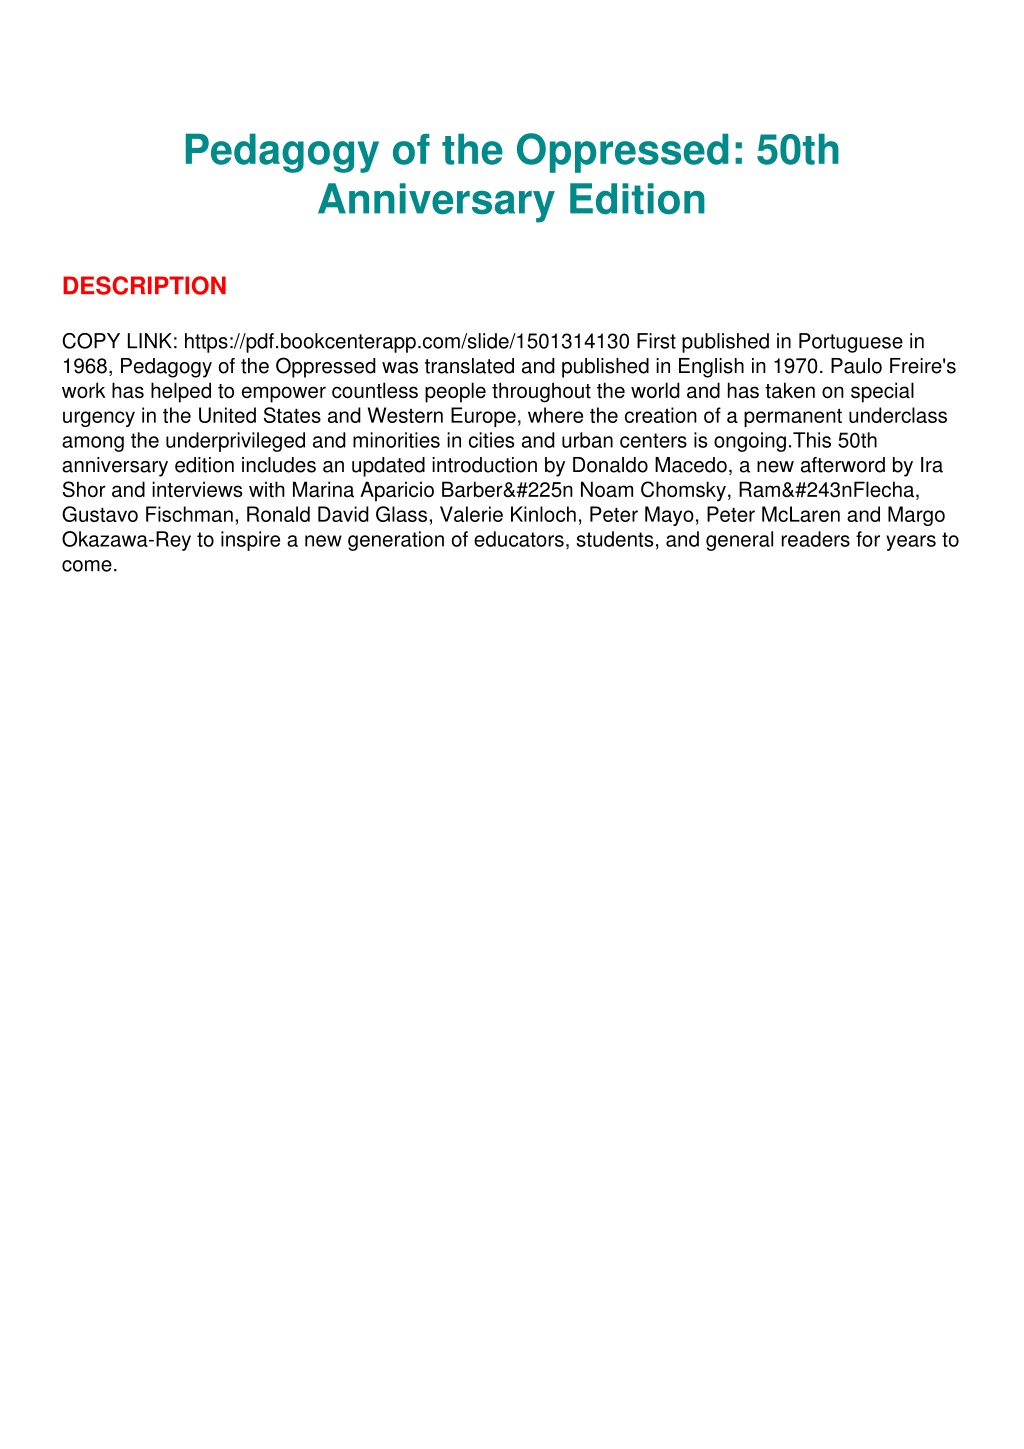 Ppt Pdf Pedagogy Of The Oppressed 50th Anniversary Edition Powerpoint Presentation Id 9380